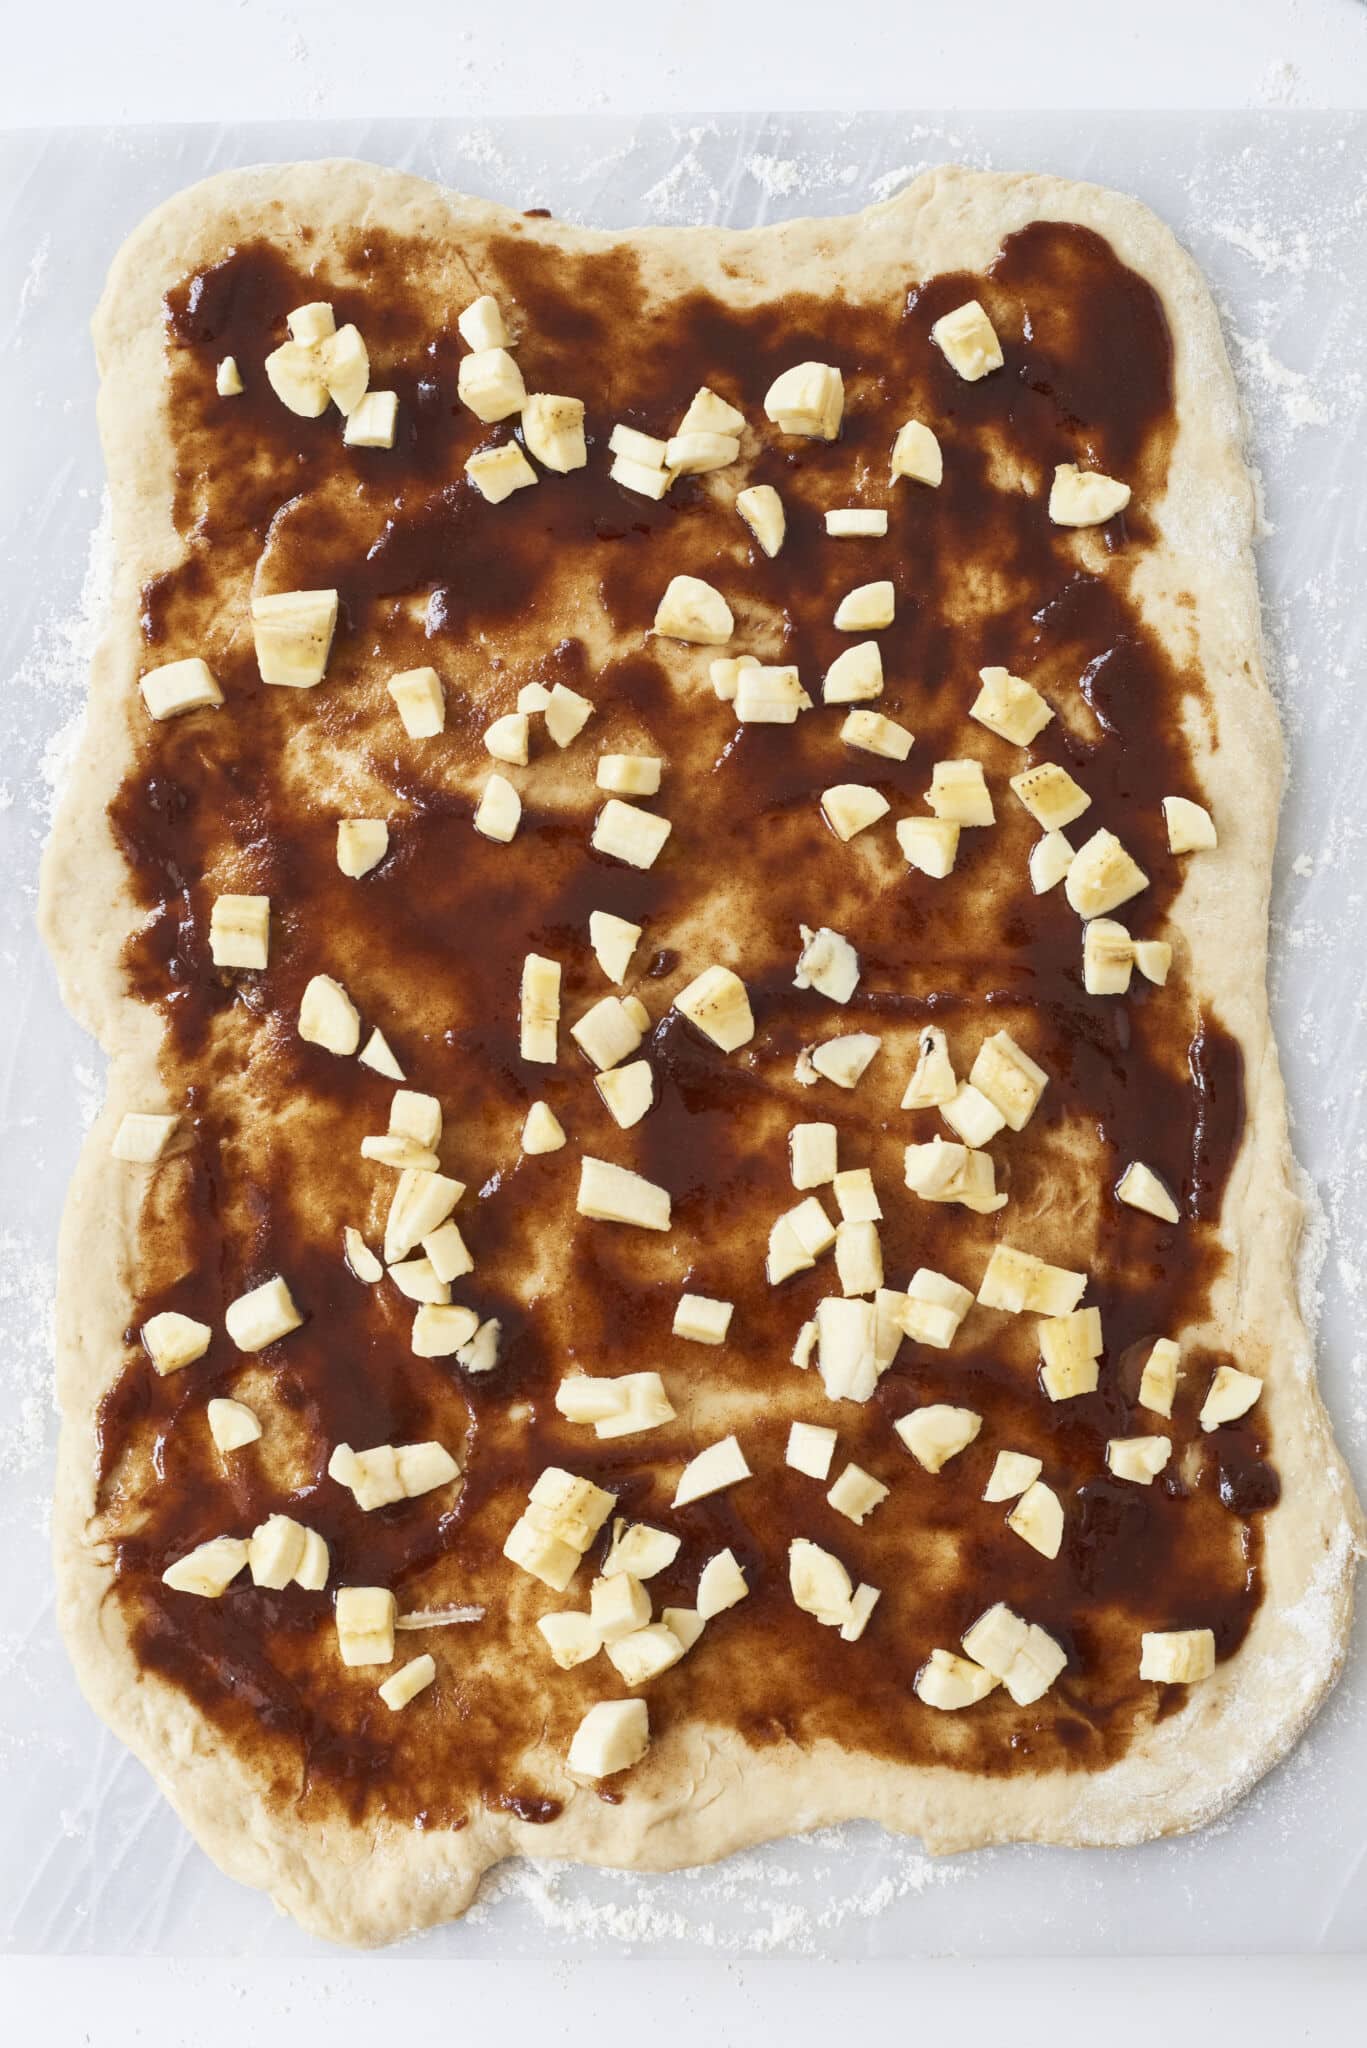 Diced fresh bananas are evenly scattered on top of the deep amber color filling over the dough. 